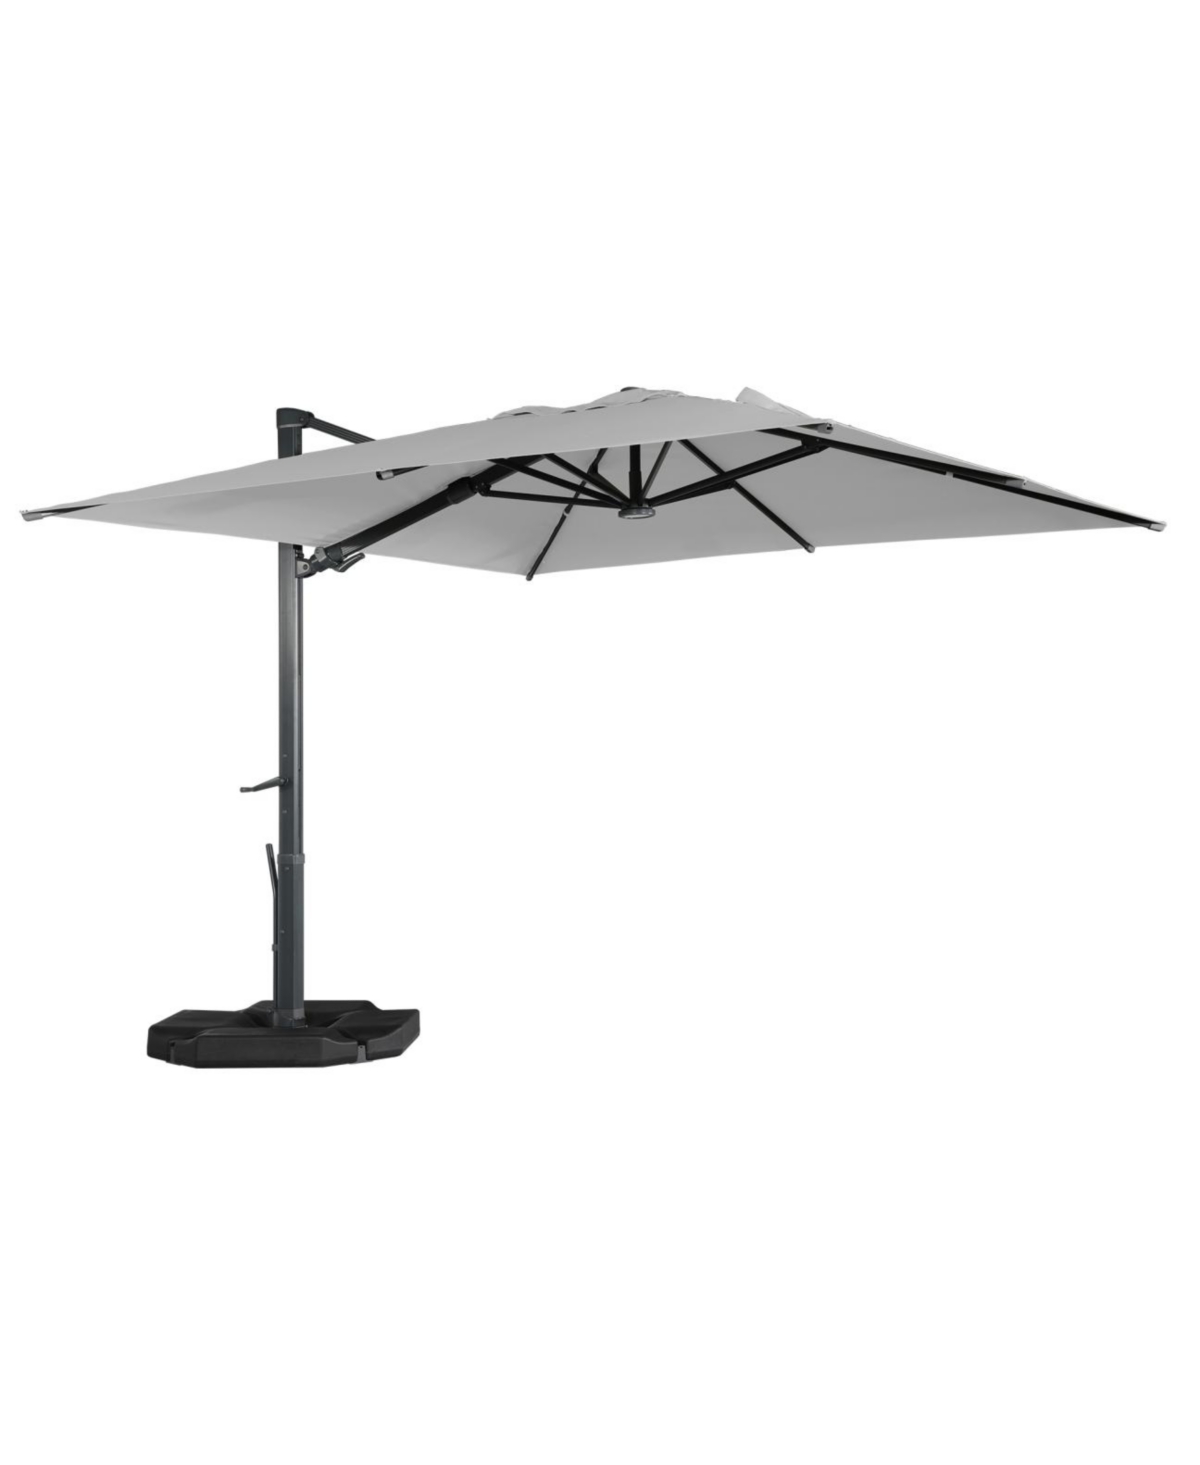 10ft Square Solar Led Offset Cantilever Patio Umbrella with Included 4-piece Base Weights - Gray